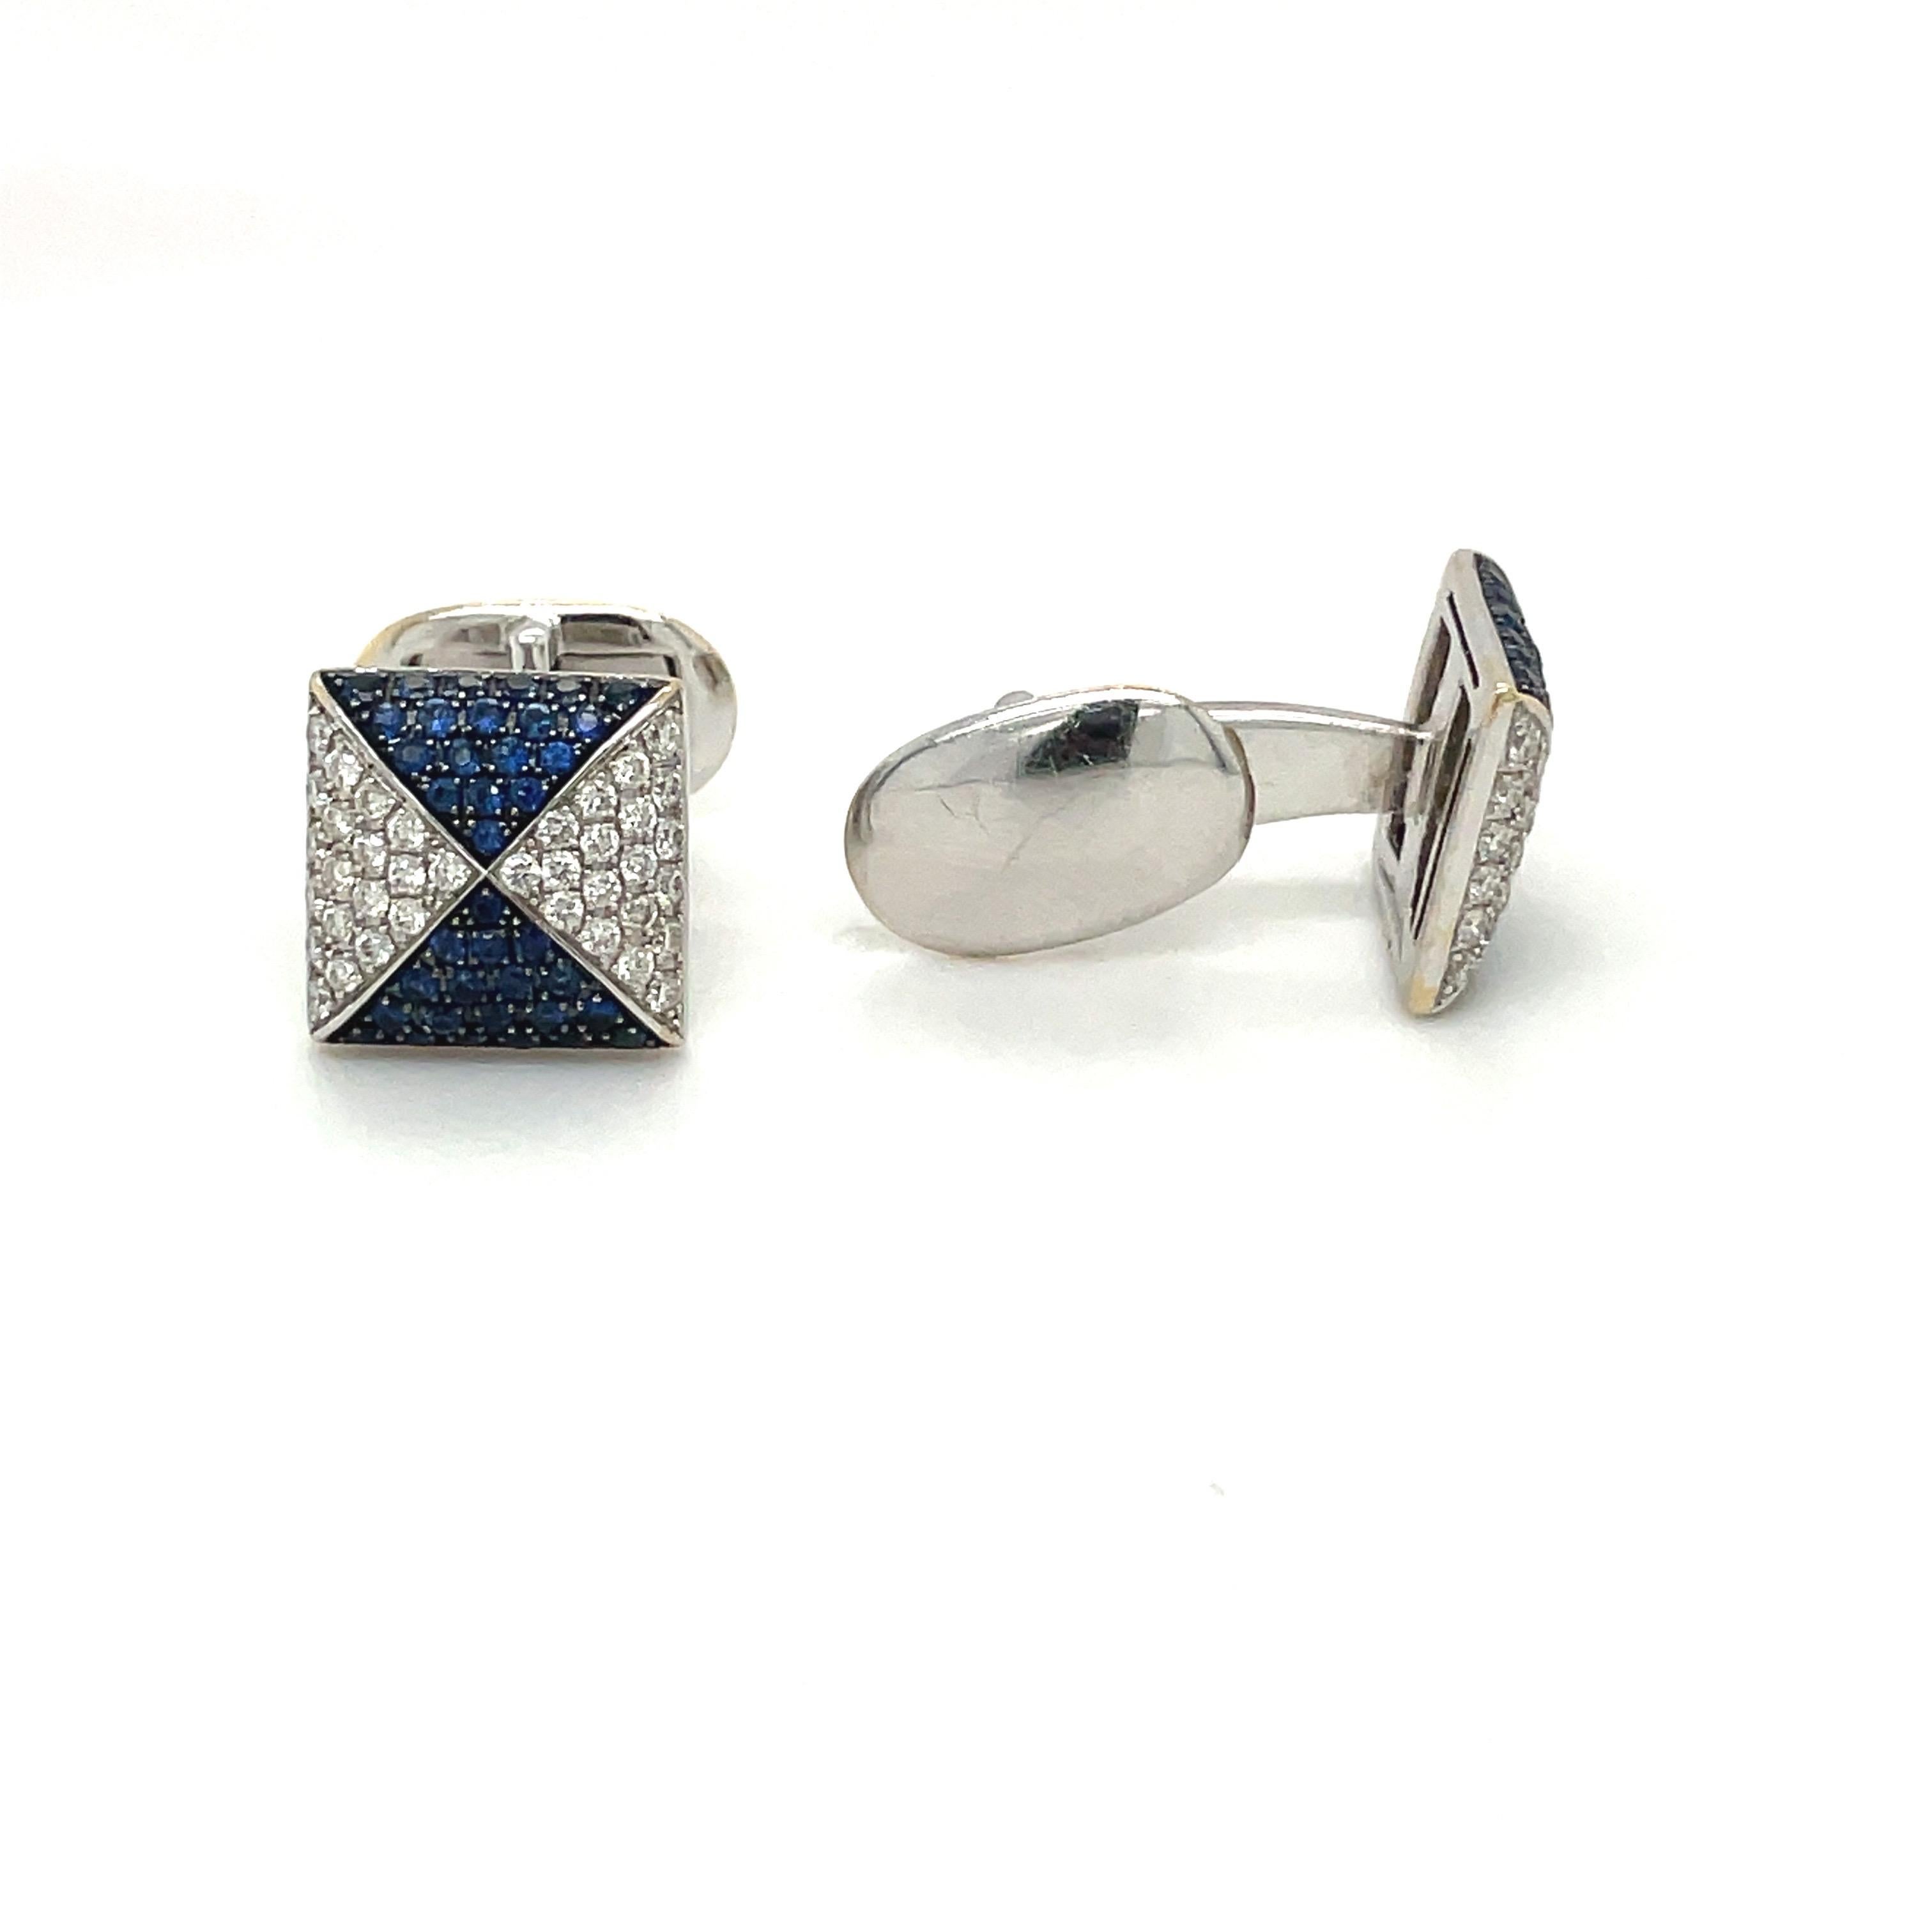 Exquisitely designed square 18 karat white gold cuff links. Four triangular shapes are pave set with brilliant diamonds and blue sapphires. The cuff links have a collapsible bar and measure 12.2mm.
Diamond weight 0.80 carats
Sapphire weight 1.00